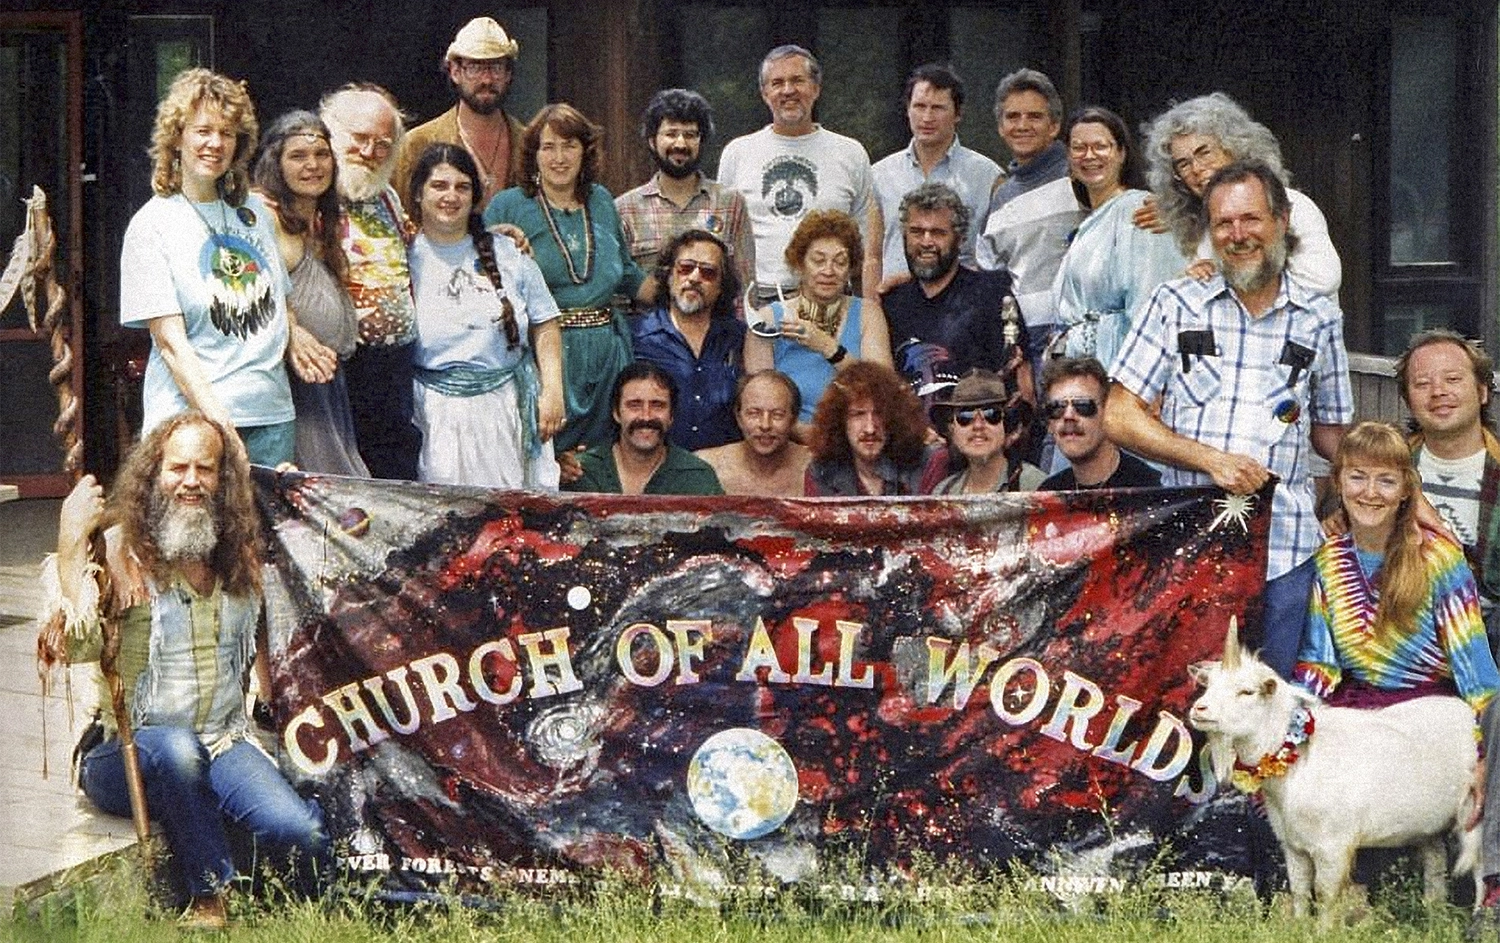 A group photo of the Church of All Worlds. They are holding a banner that says “Church of All Worlds” and there is also a white goat with a single horn, looking like a little unicorn.